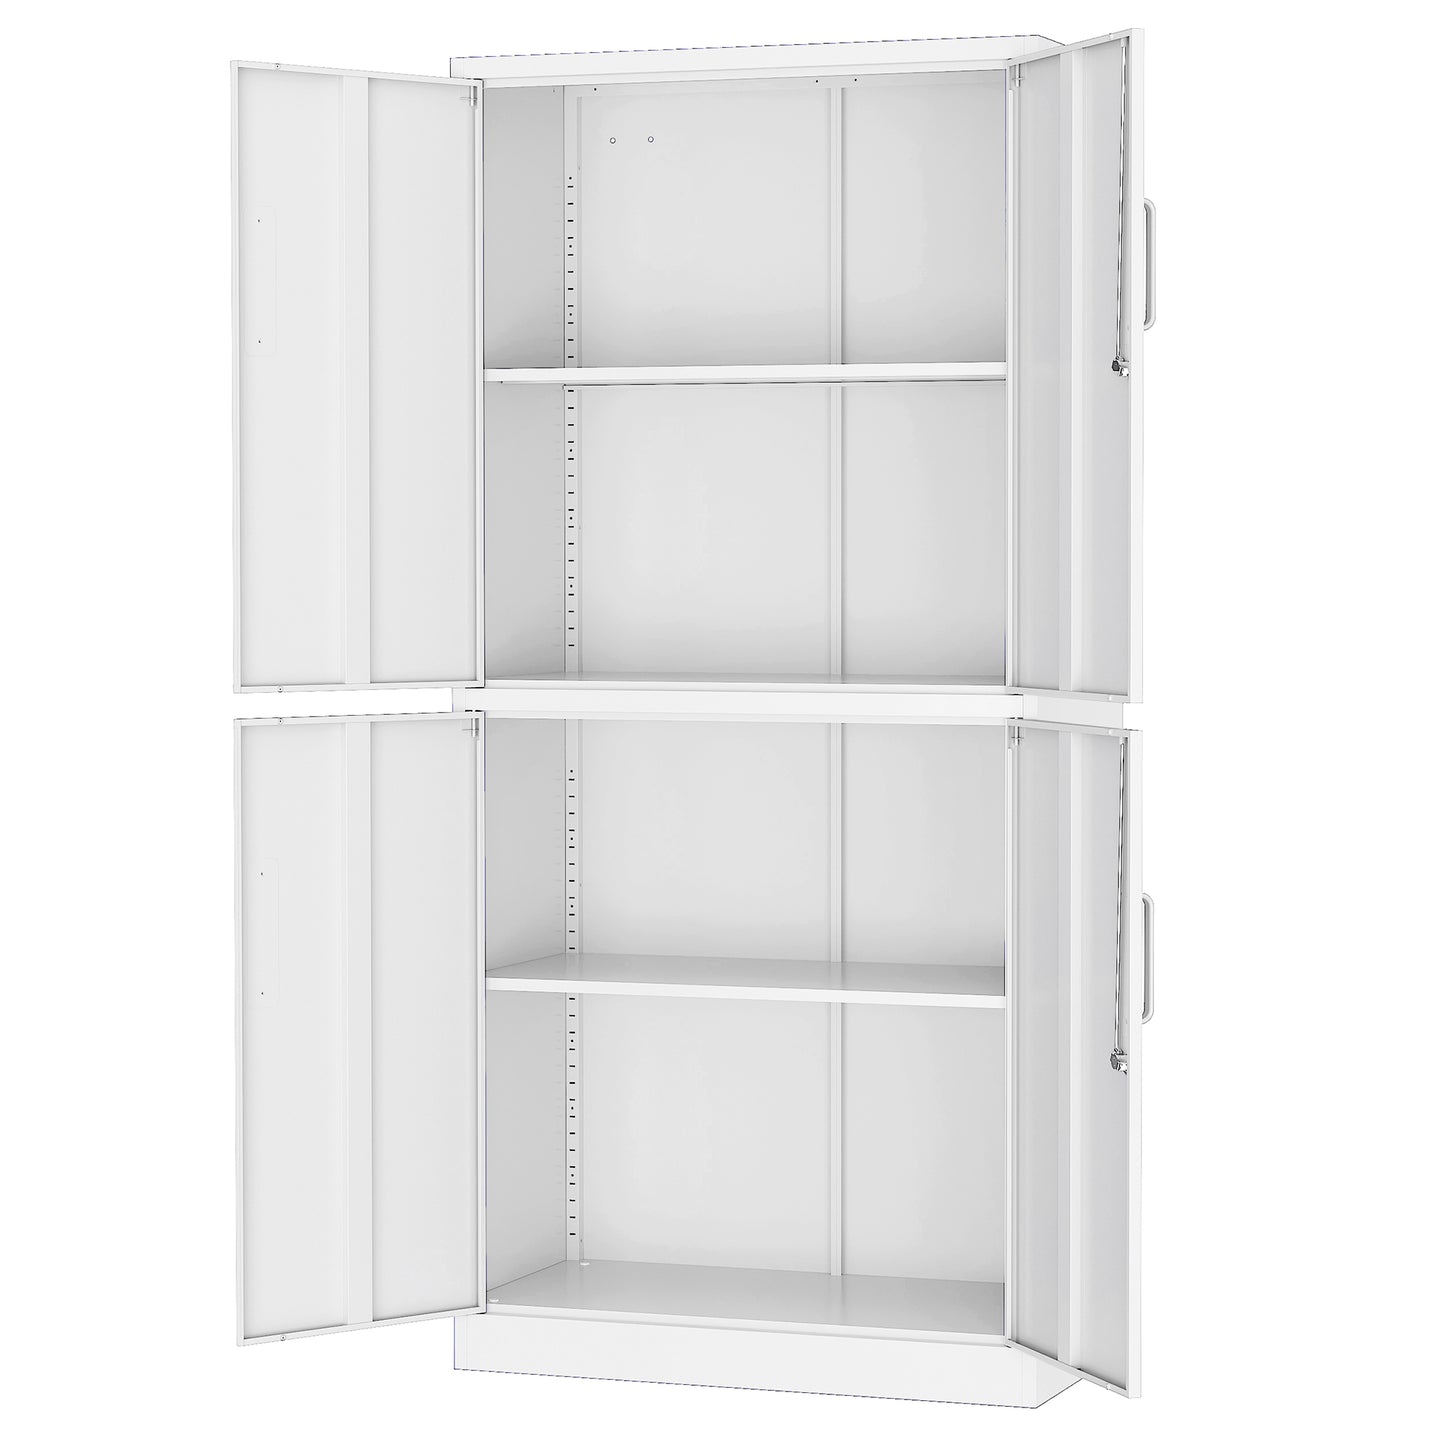 SYNGAR Garage Cabinet, 72in Metal Lock Storage Cabinet with Doors and Shelves, Office Cabinet for Home Office Utility Room Office and Kitchen Pantry, White